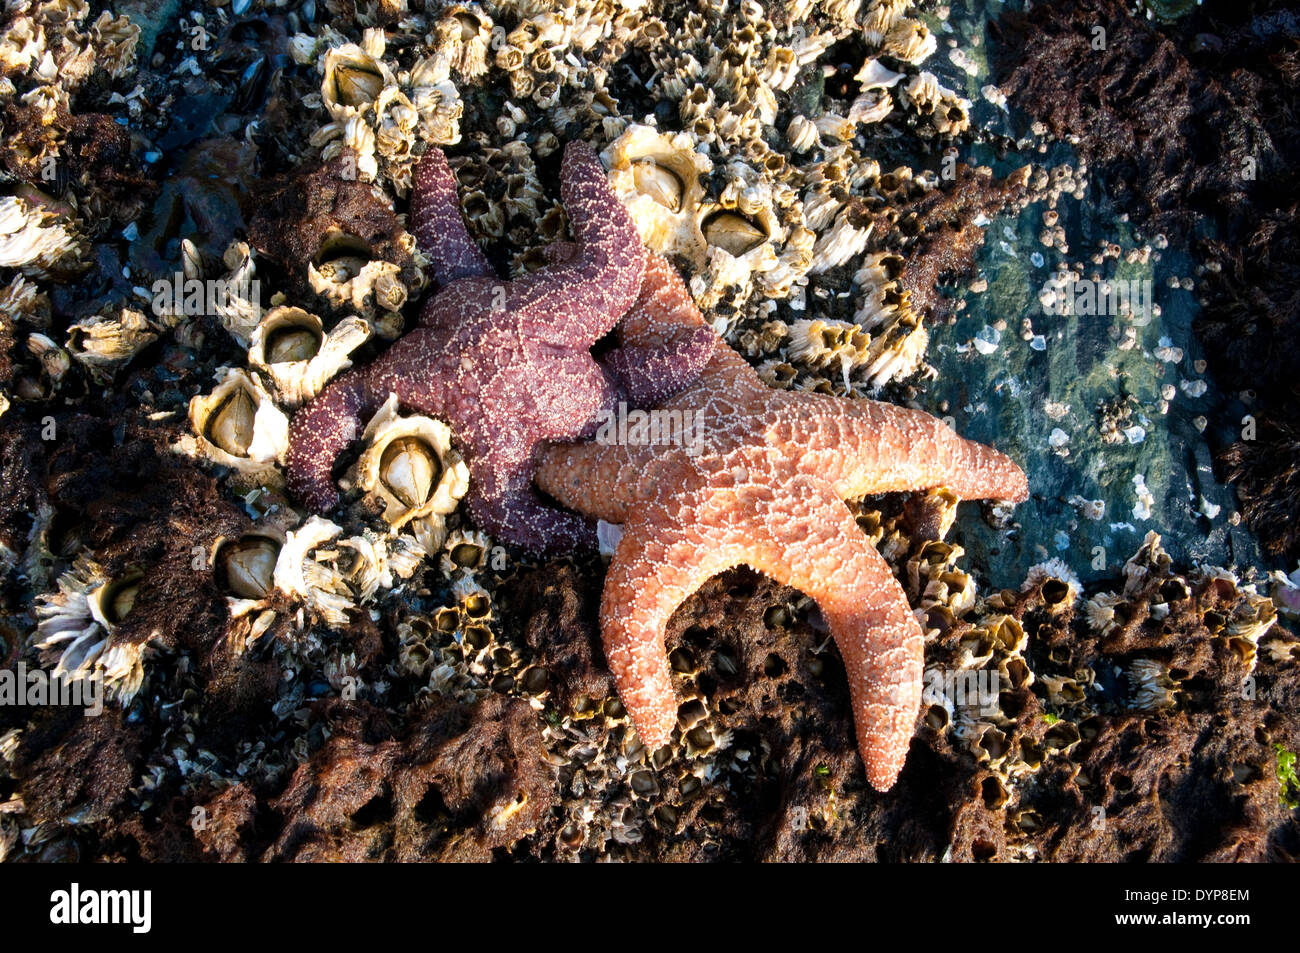 Two starfish on barnacle covered rocks in a Pacific ocean intertidal zone in the Great Bear Rainforest, British Columbia, Canada. Stock Photo